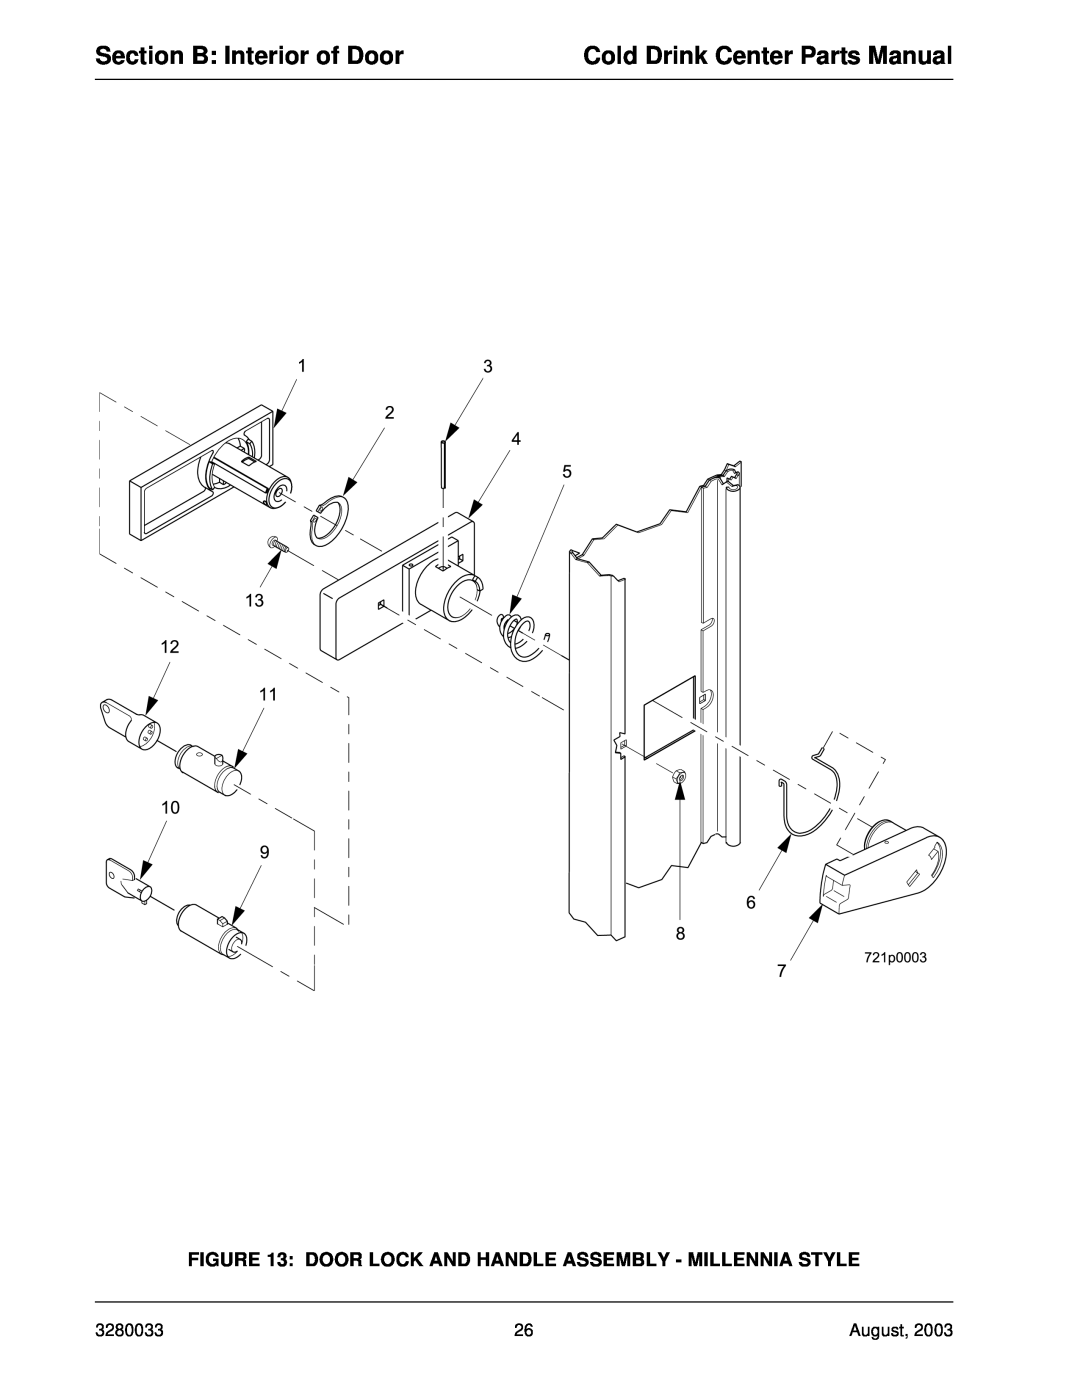 Crane Merchandising Systems 328, 327 manual Section B Interior of Door, Cold Drink Center Parts Manual 